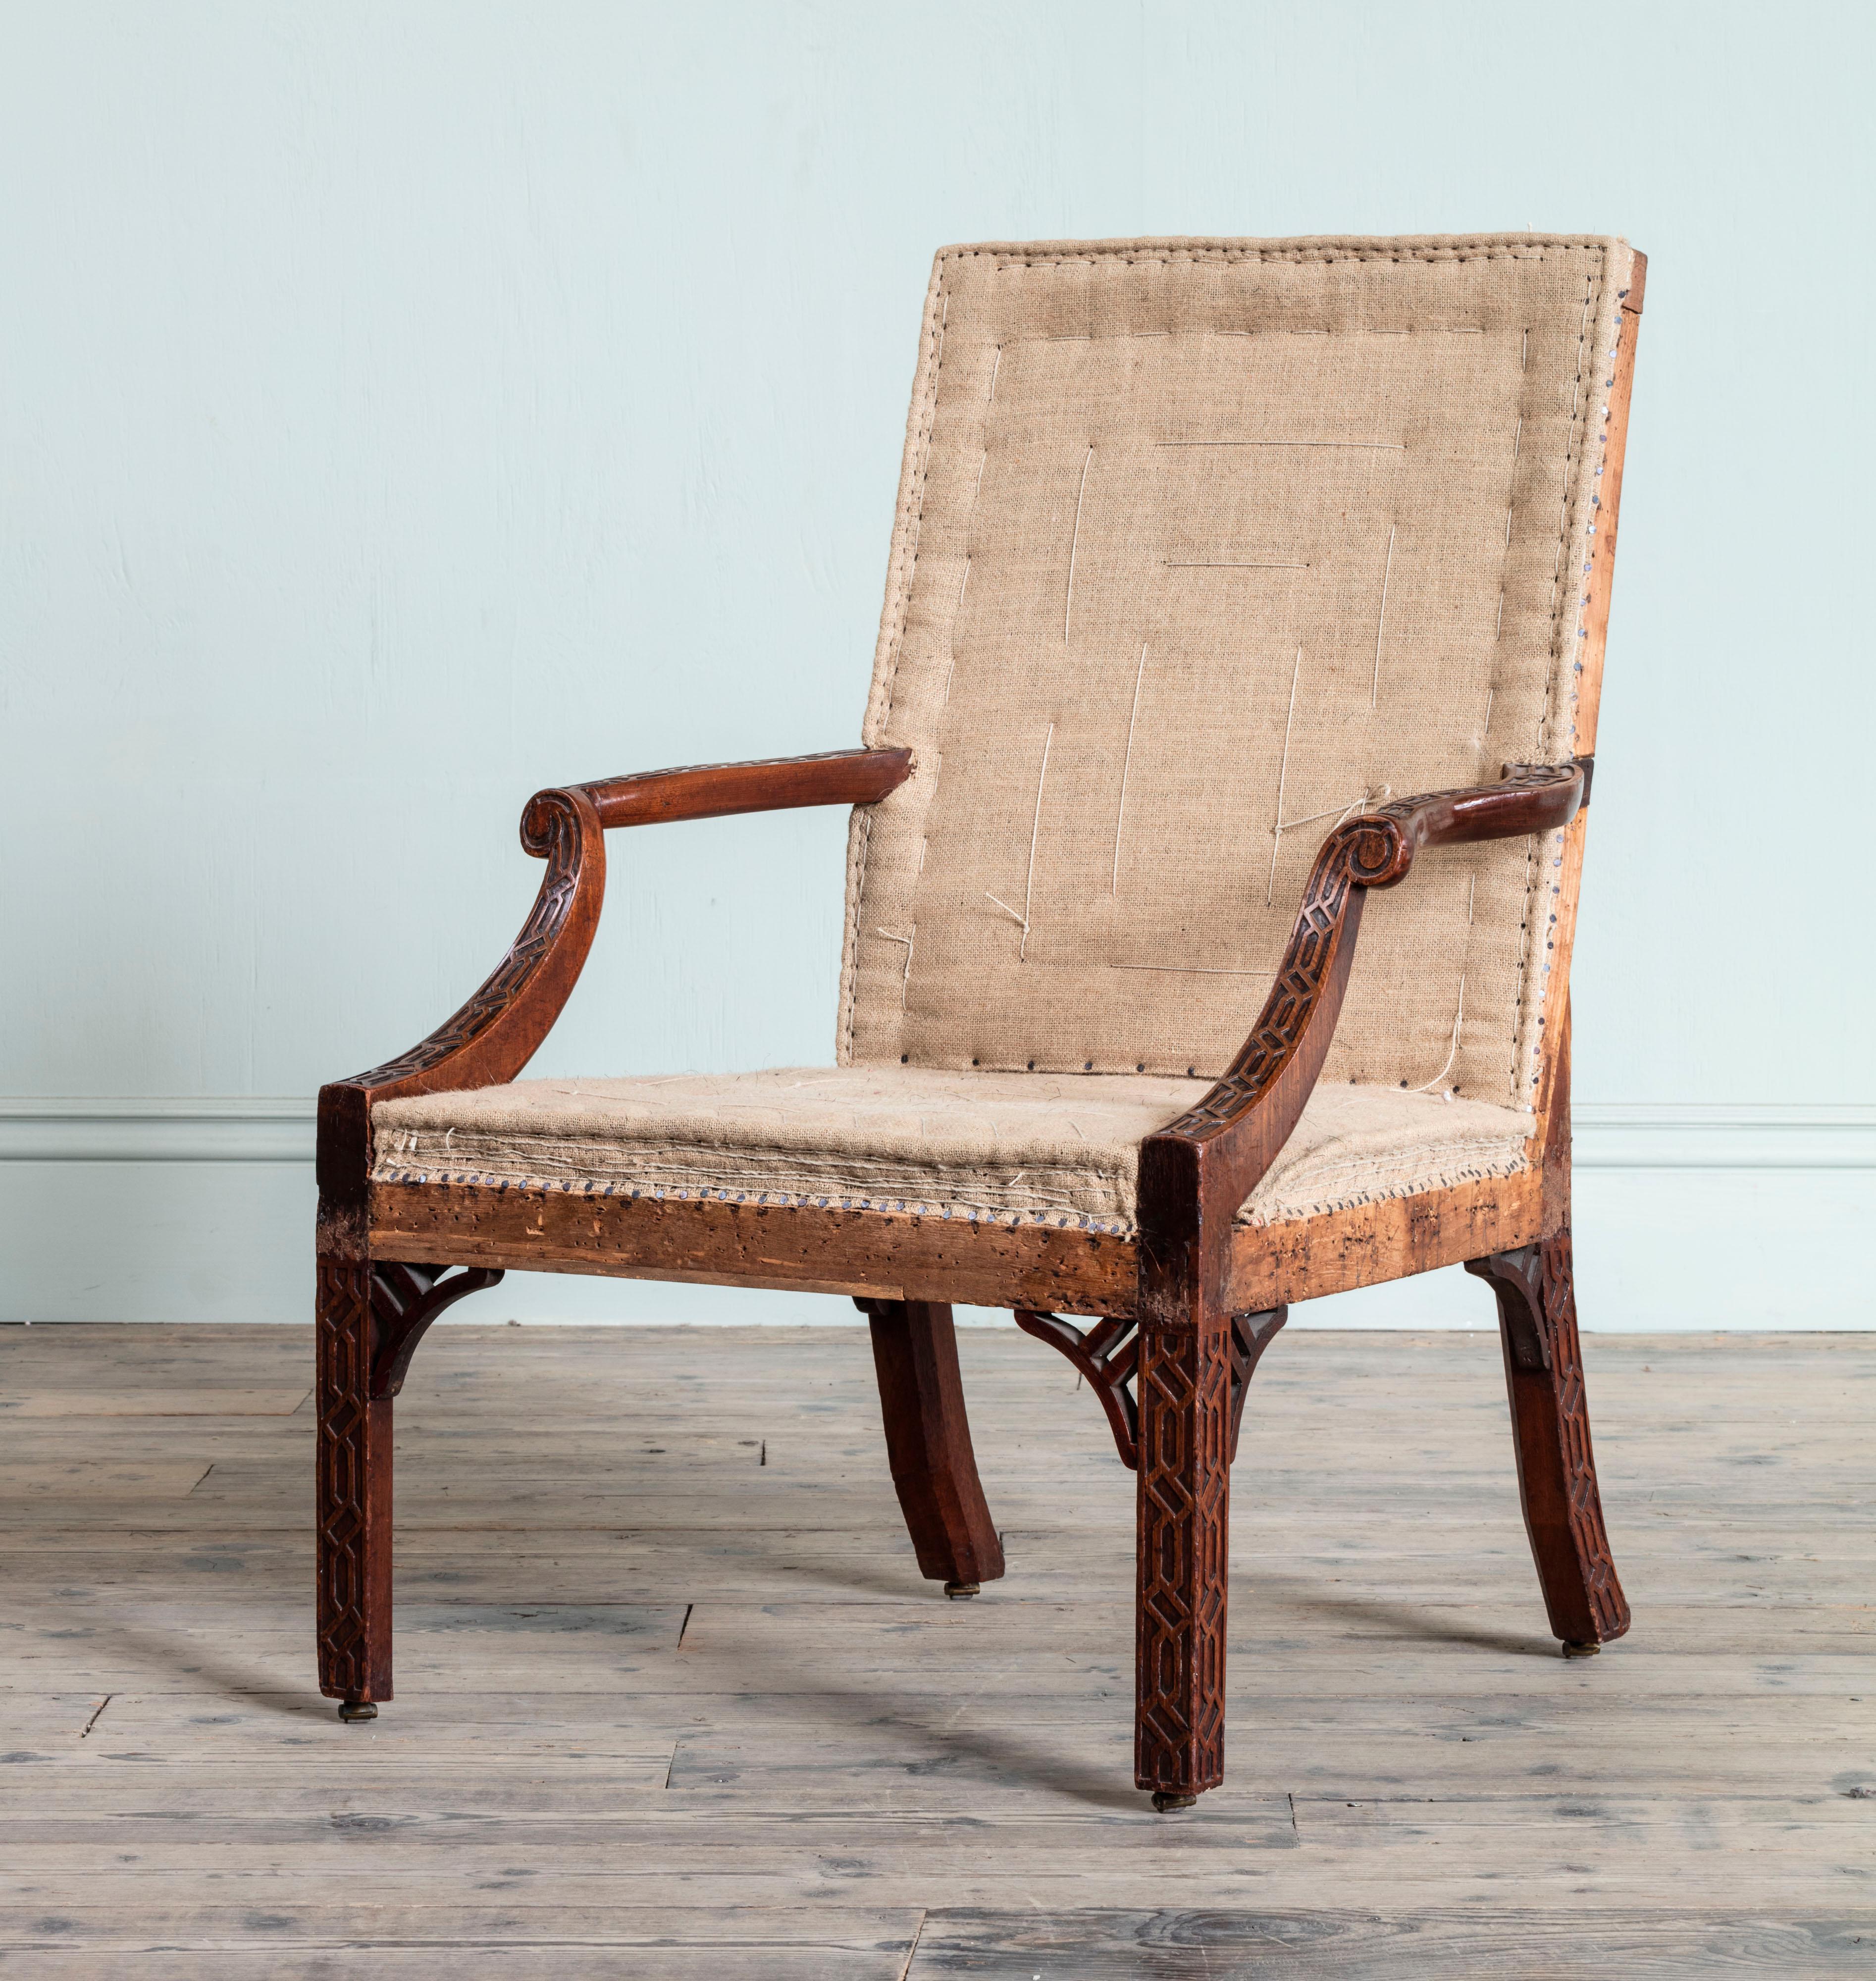 The arms and legs with exceptional blind fretwork carving, on leather casters with stitched hessian upholstery. In the manner of William Masters.

Provenance: The Oxley family, The Hall, Ripon, Yorkshire and by family descent.

Pair of